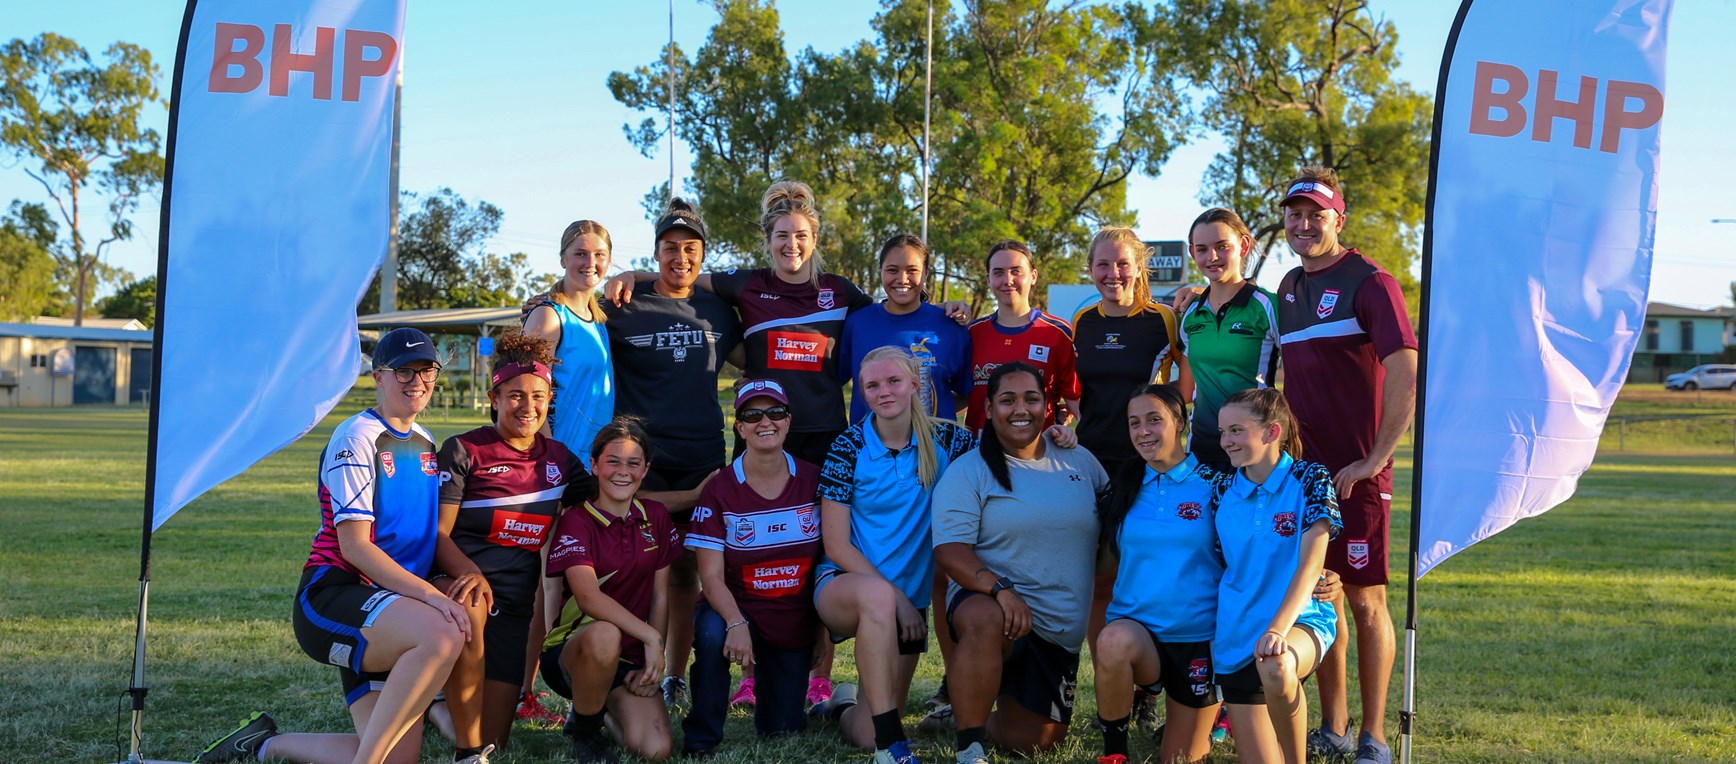 In pictures: Moranbah BHP Talent ID clinic